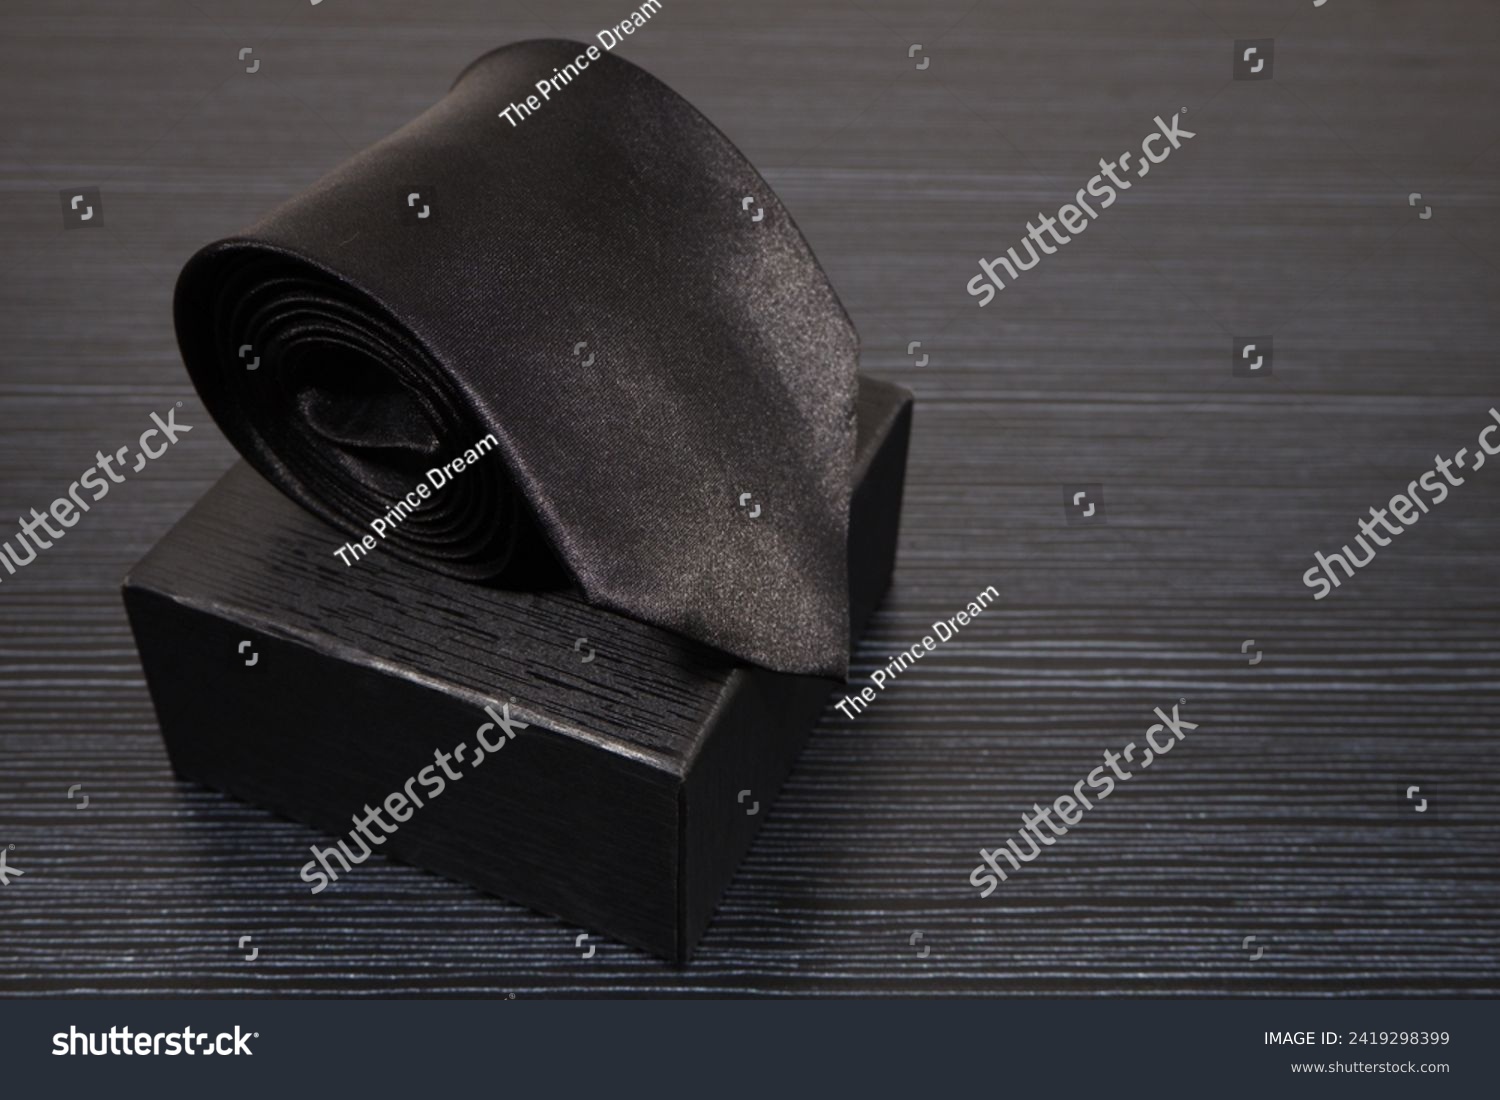 Black tie rolled on black gift box close up view, Black on black concept, Copy space, Single object  #2419298399